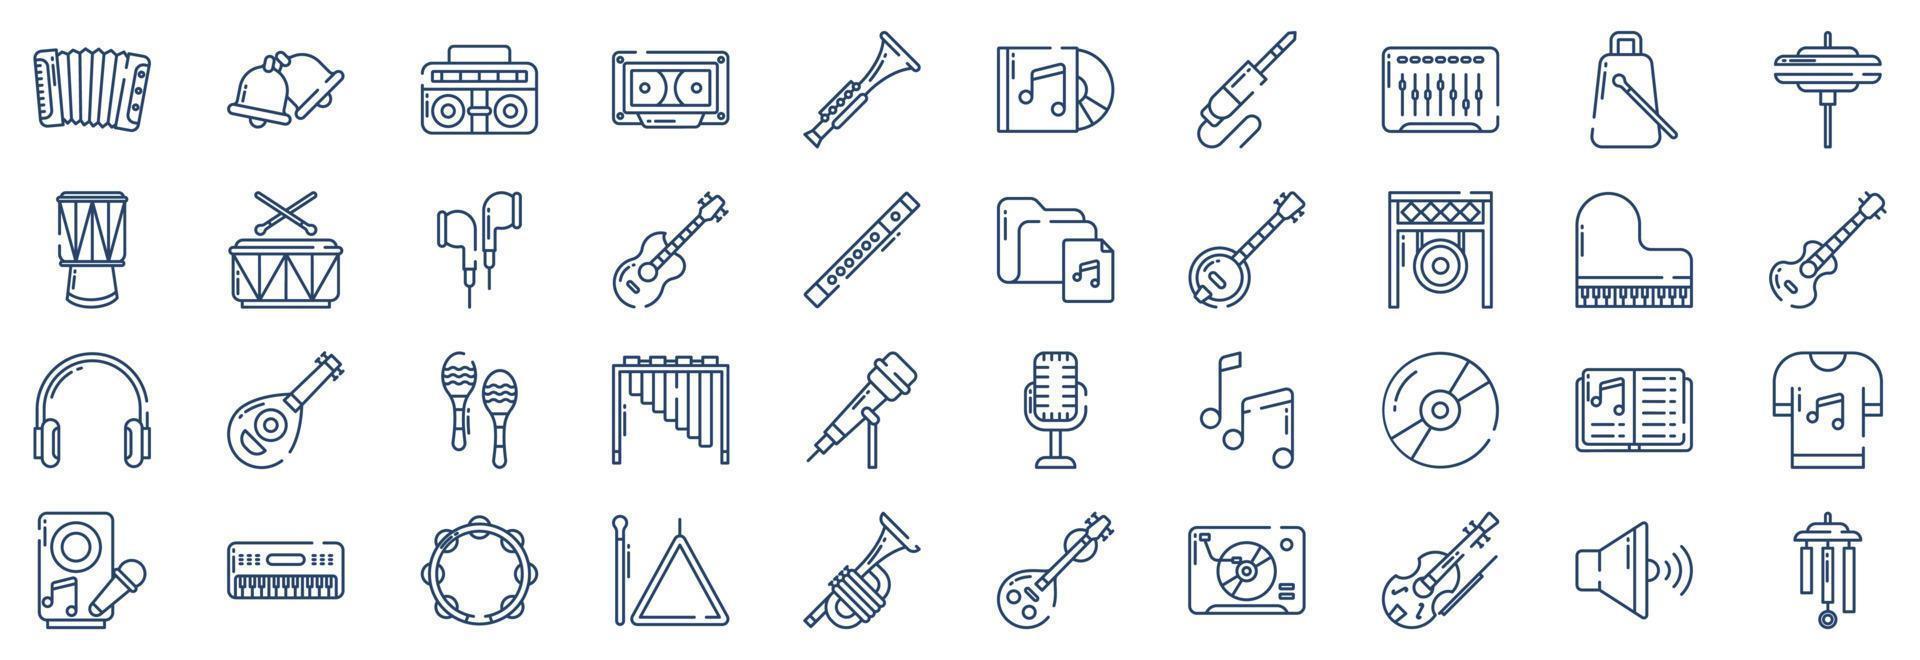 Collection of icons related to Music instrument, including icons like Accordion, Bell, Boombox, and more. vector illustrations, Pixel Perfect set